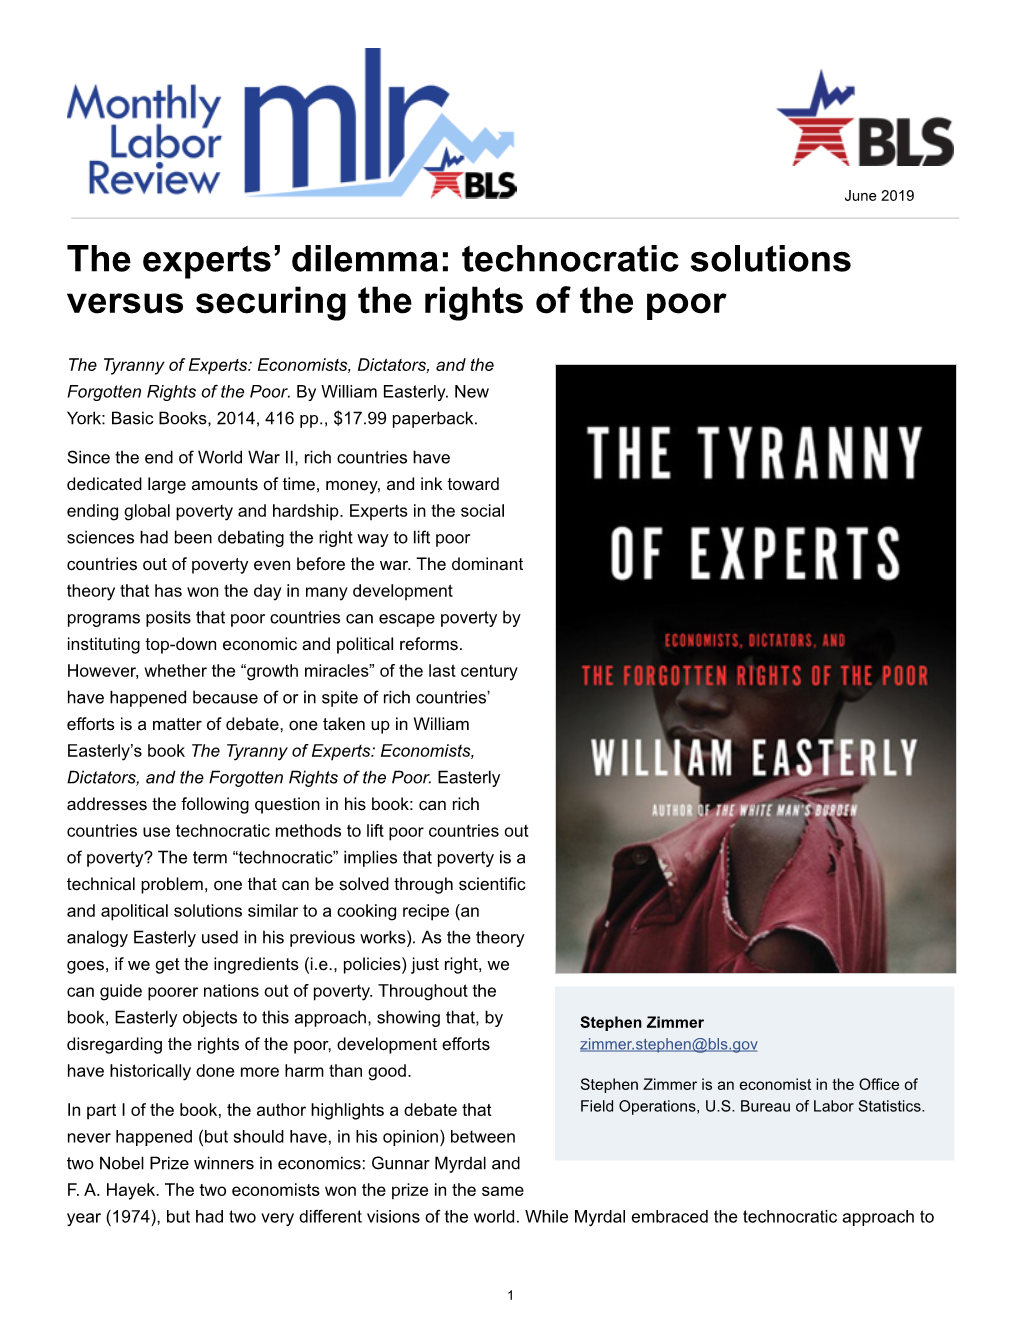 Technocratic Solutions Versus Securing the Rights of the Poor